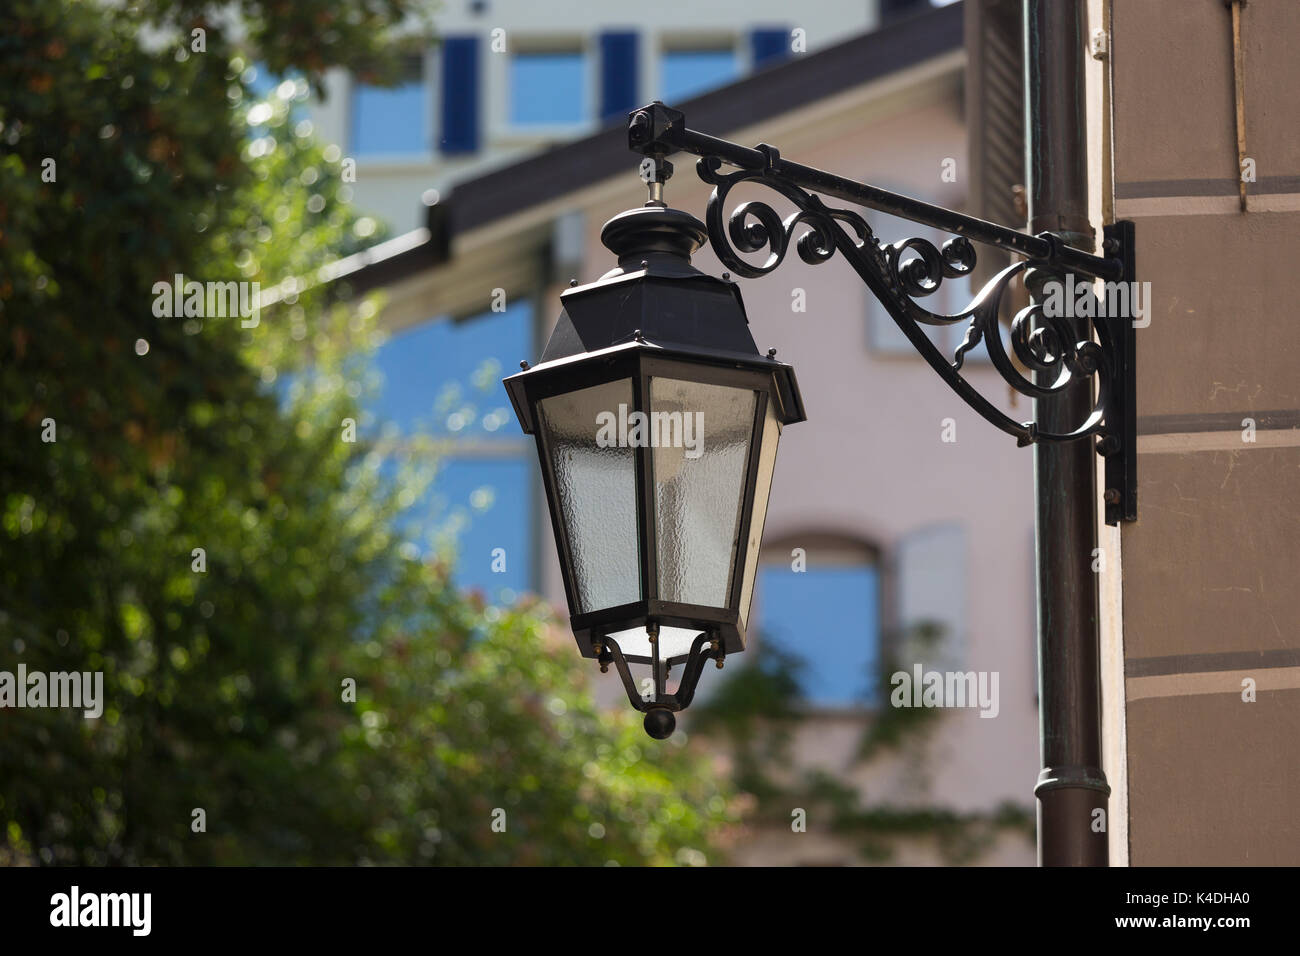 SION, SWITZERLAND - Ornate lamp post in Sion. Stock Photo